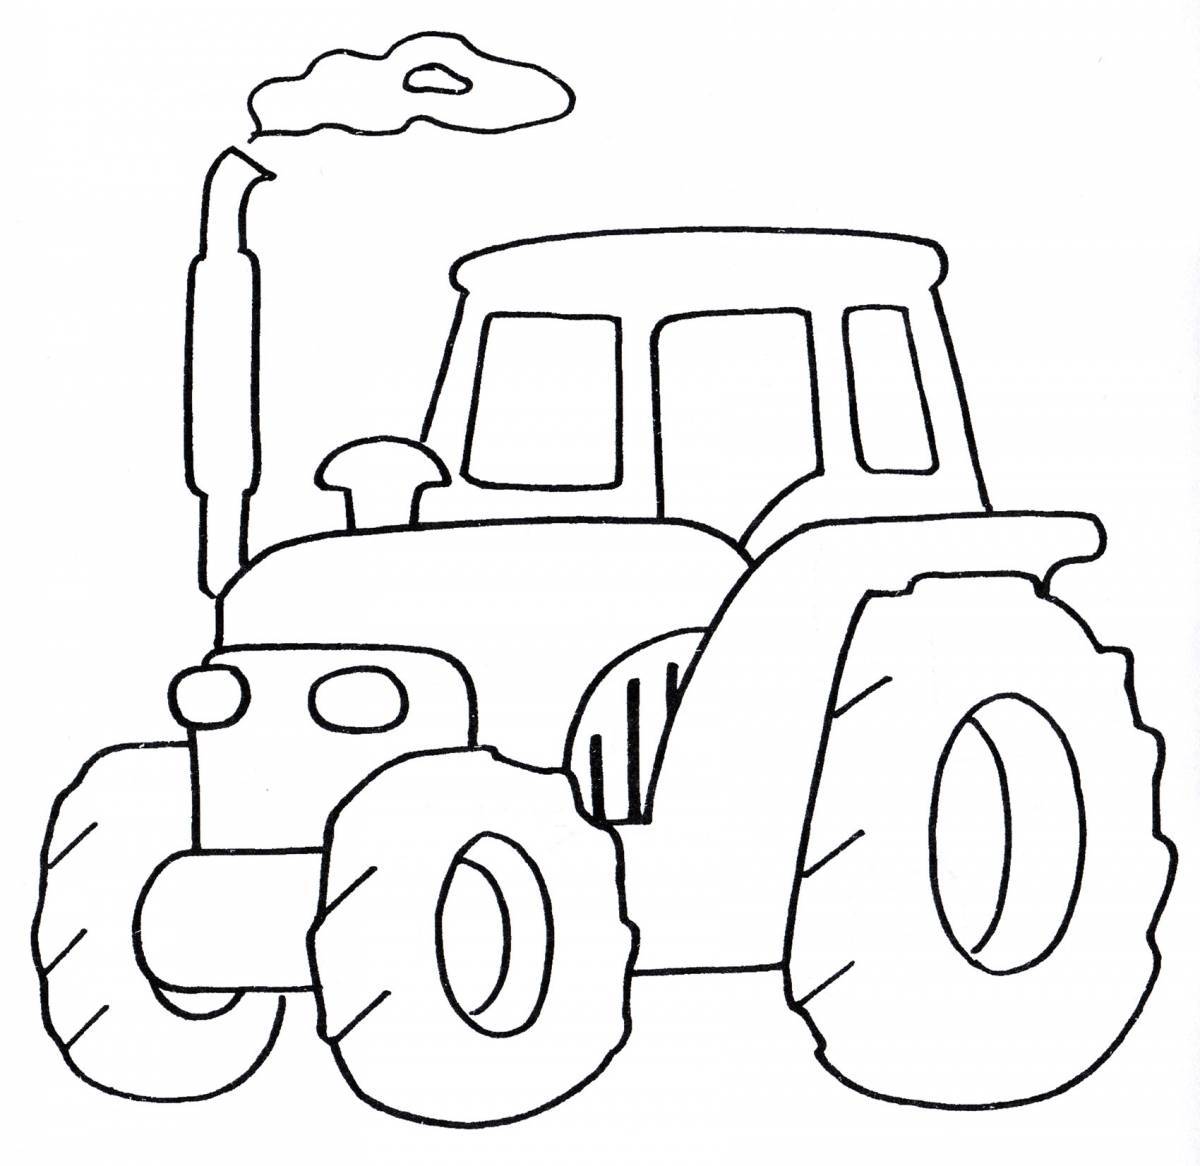 Colorful tractor coloring page for 5-6 year olds